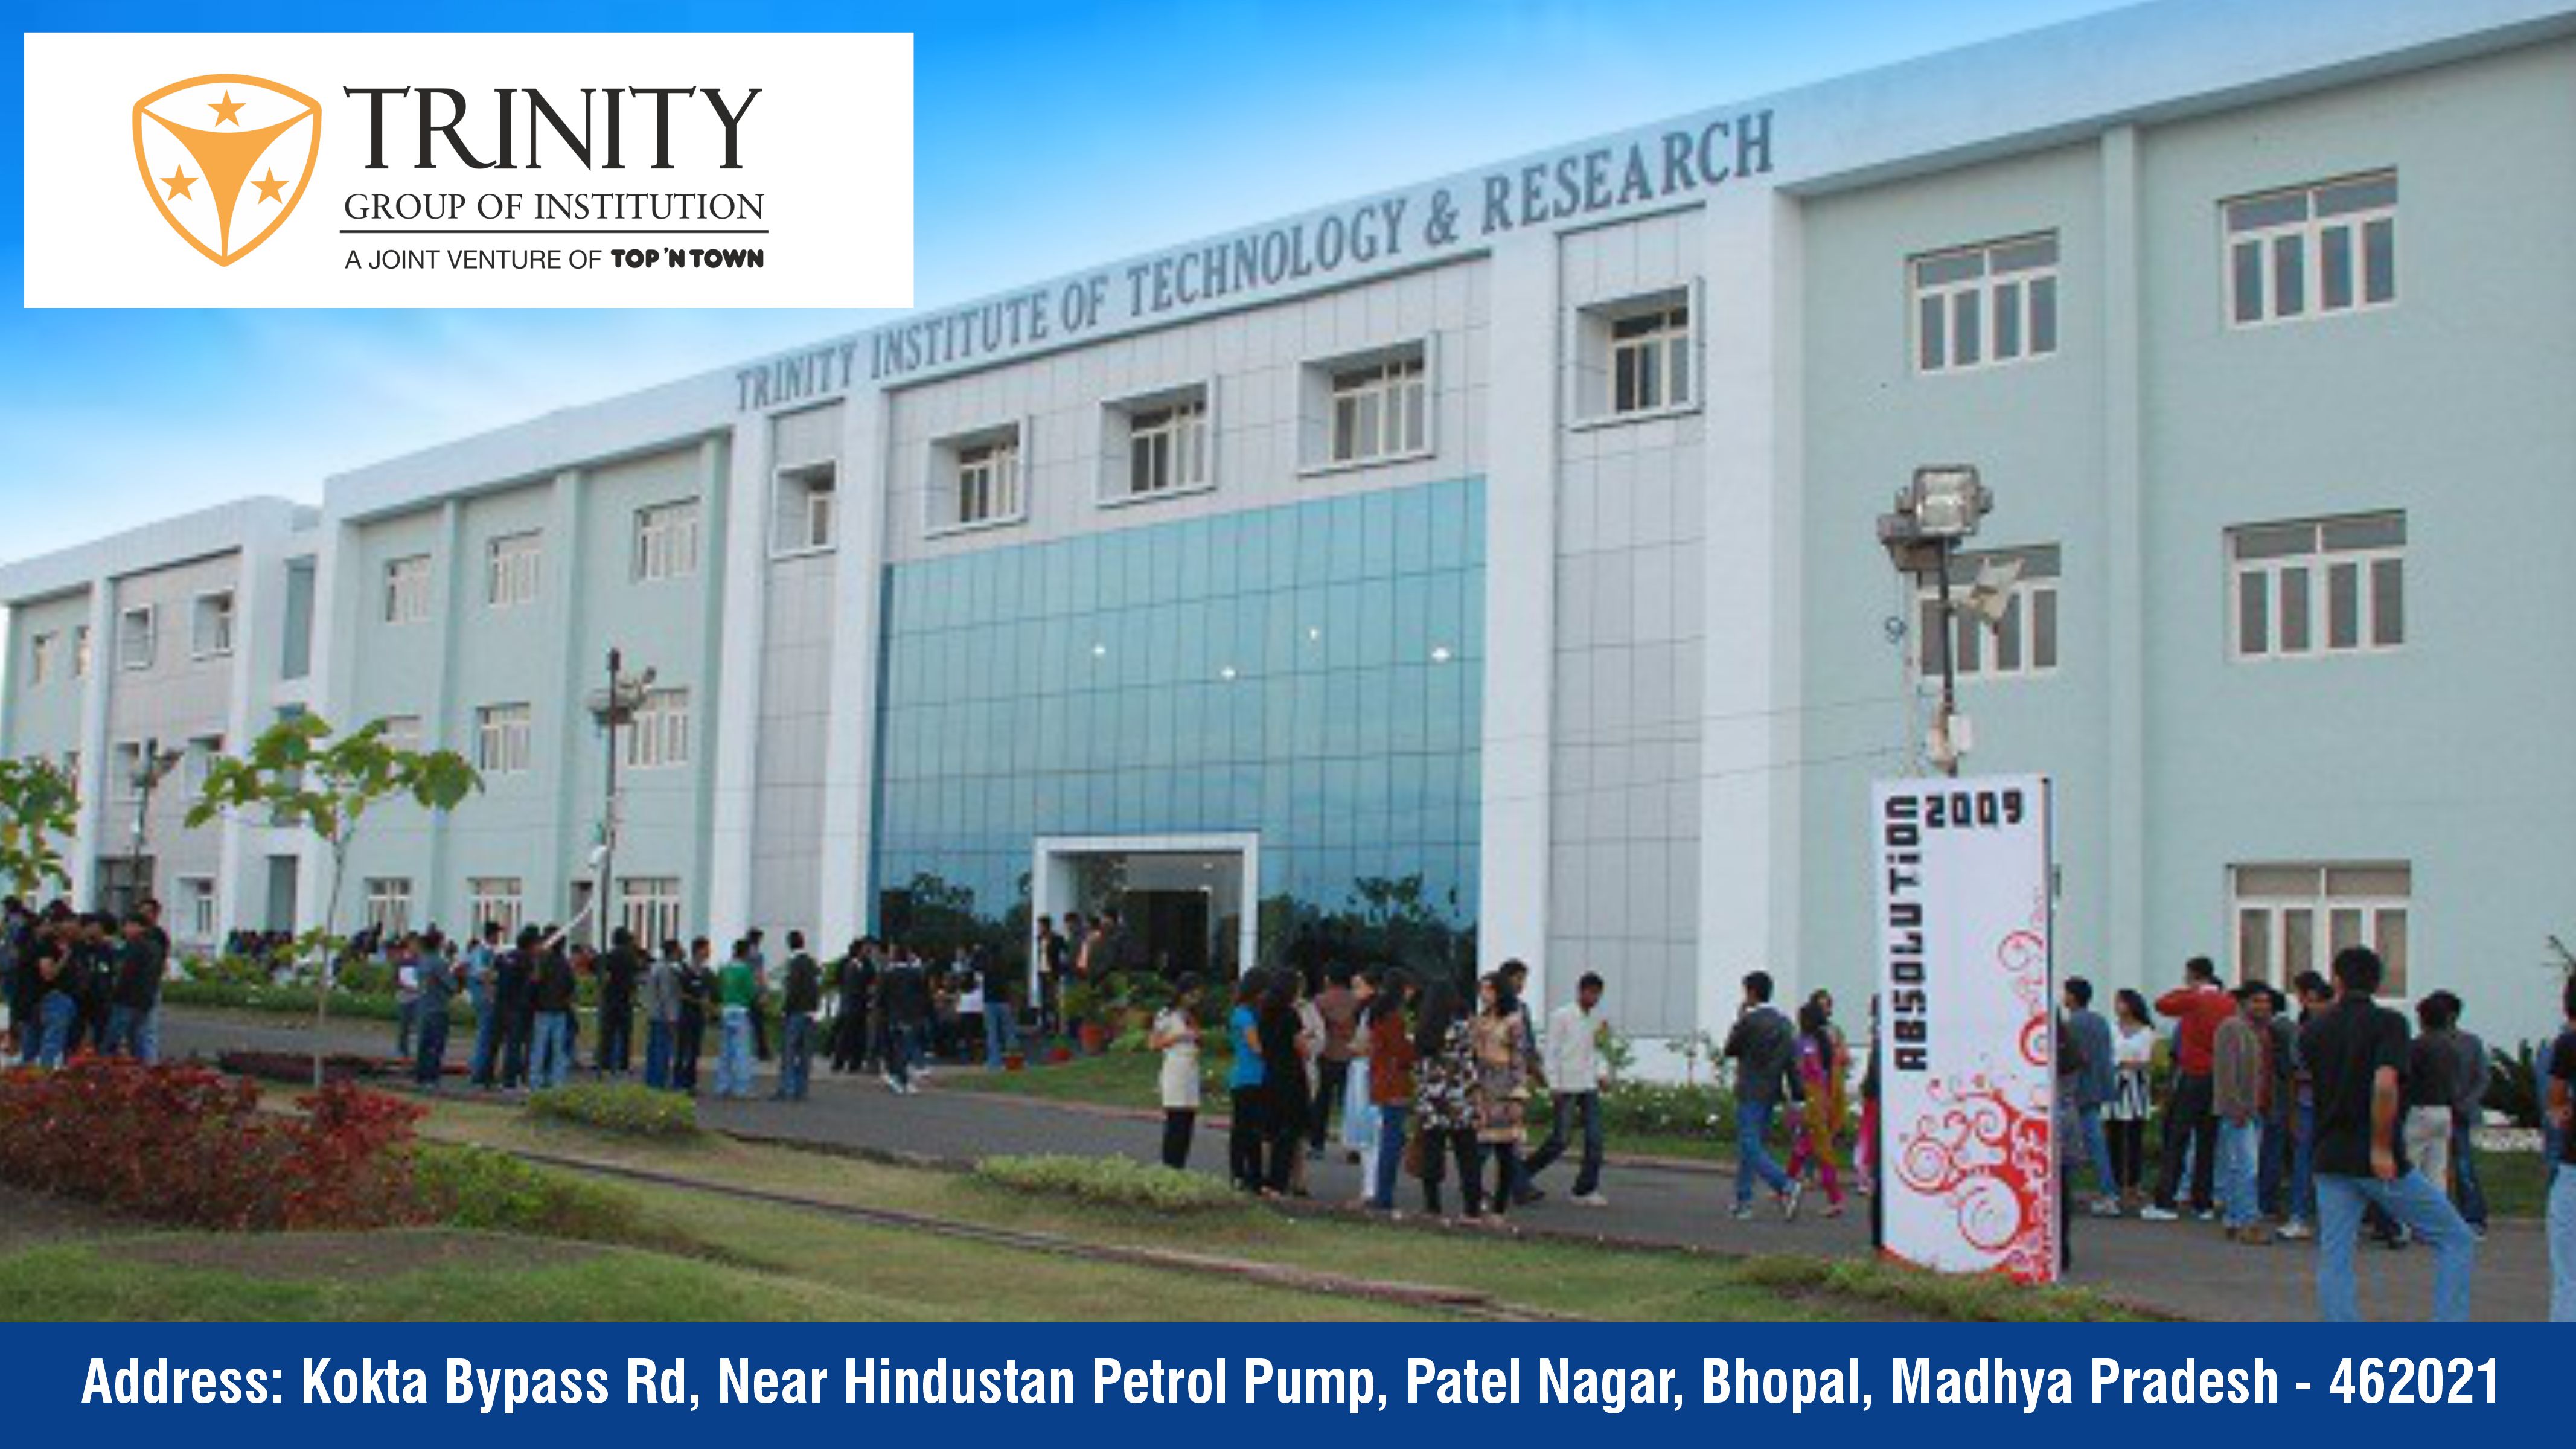 Out Side View of Trinity Institute of Technology & Research, Bhopal